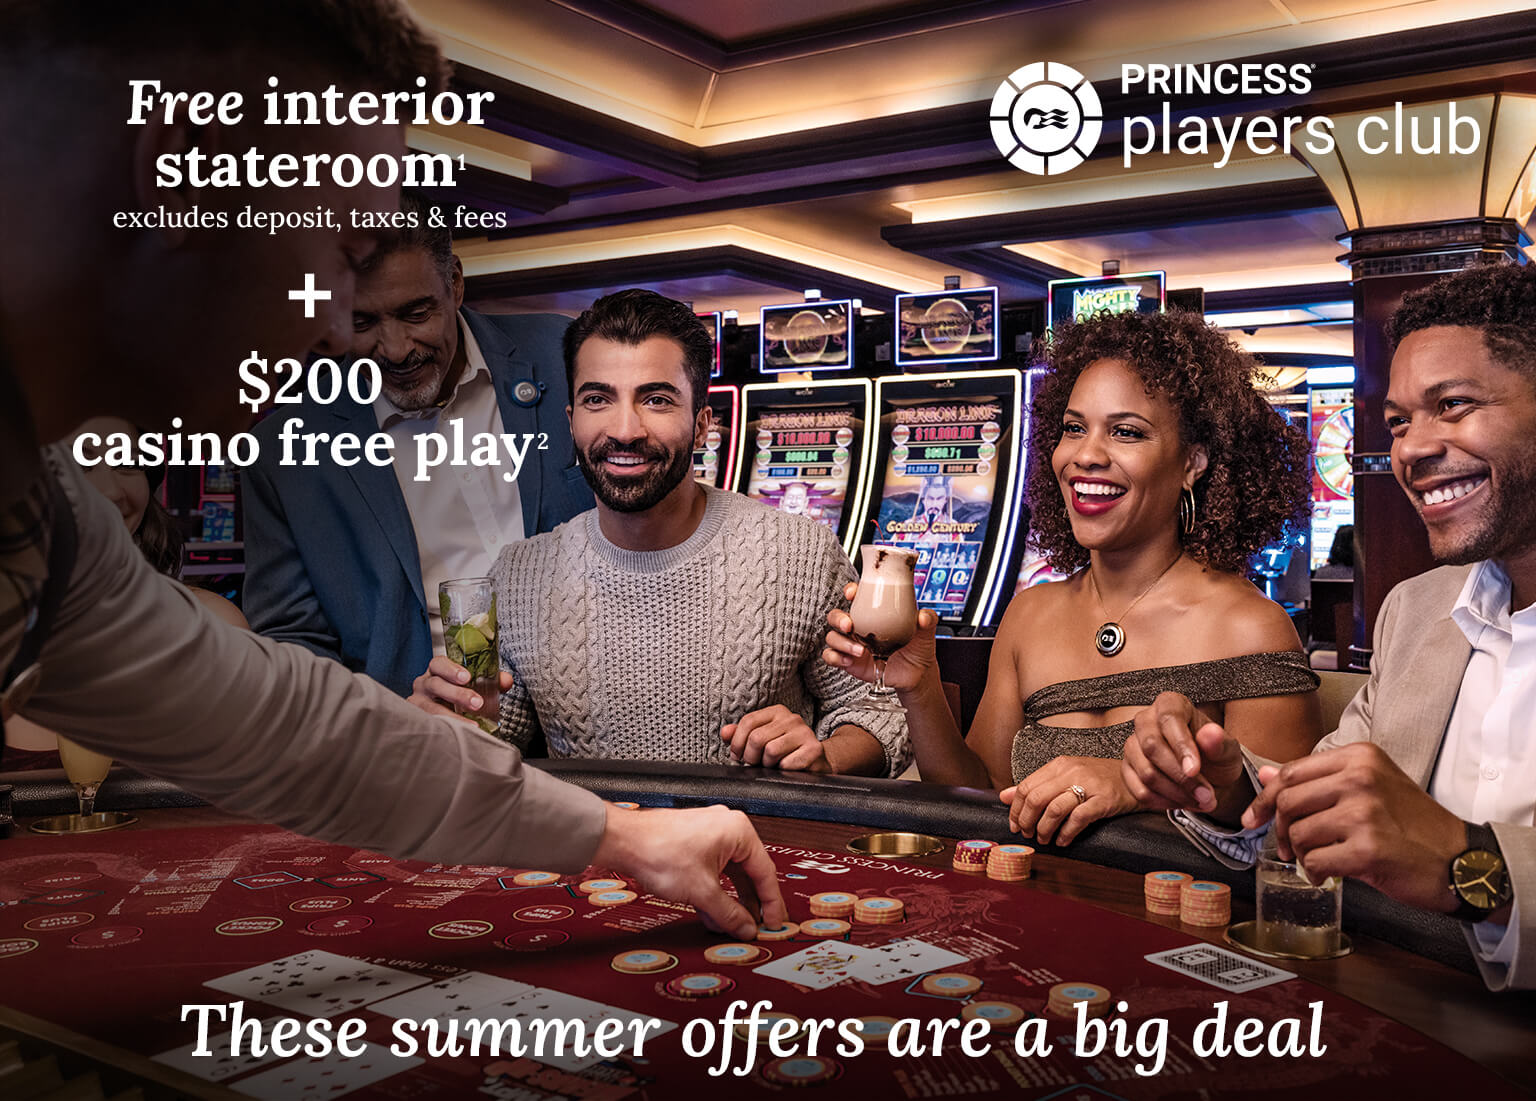 free interior stateroom + $200 casino free play. Click here to book.